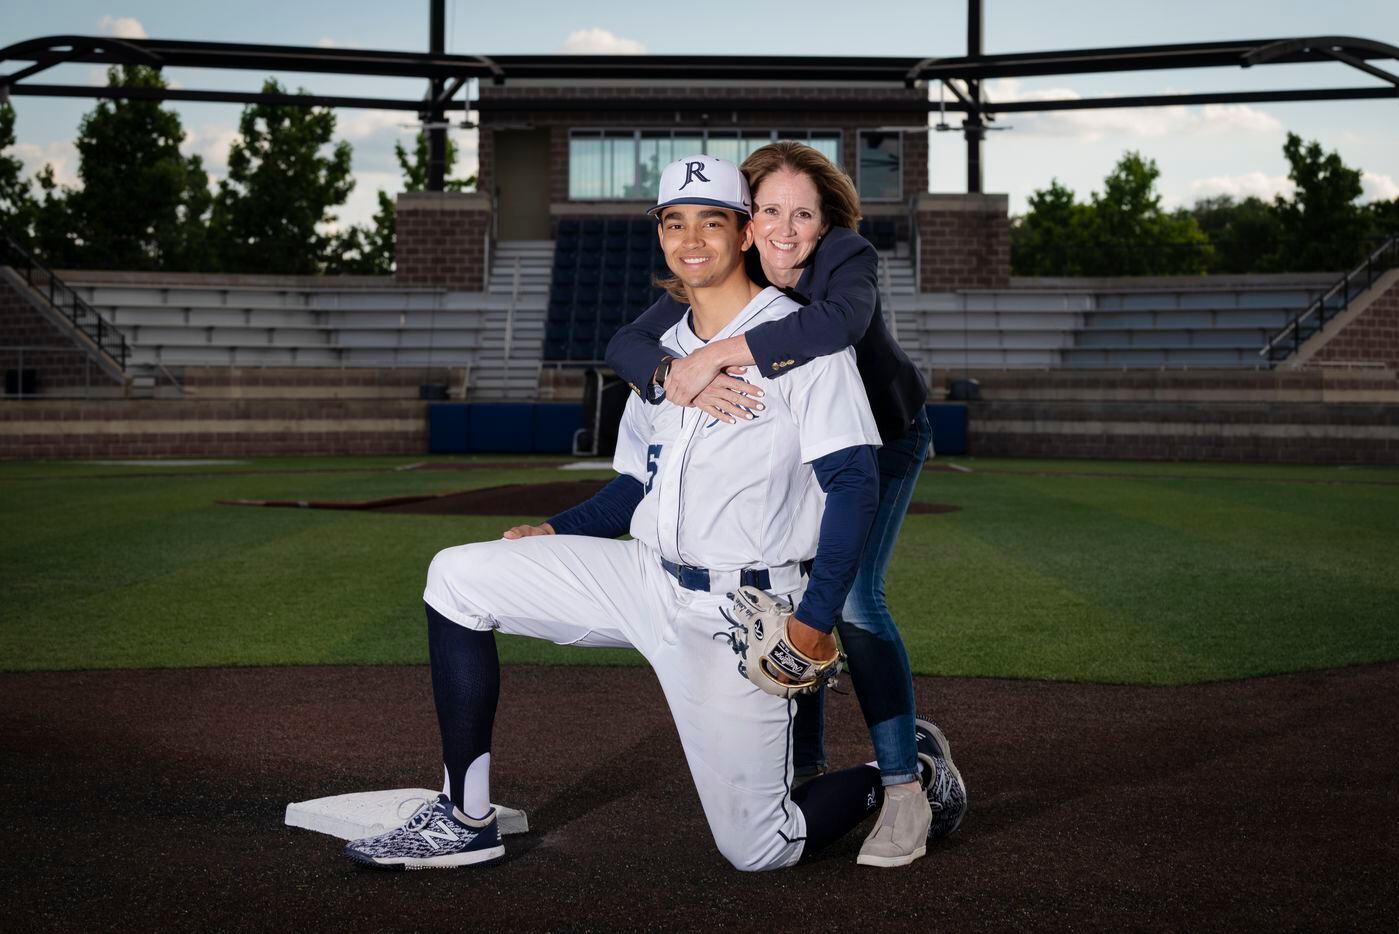 Jesuit senior shortstop Jordan Lawlar, 18, and his mother Hope Lawlar on the baseball diamond on the campus of Jesuit College Preparatory School of Dallas, on Tuesday, May 04, 2021.